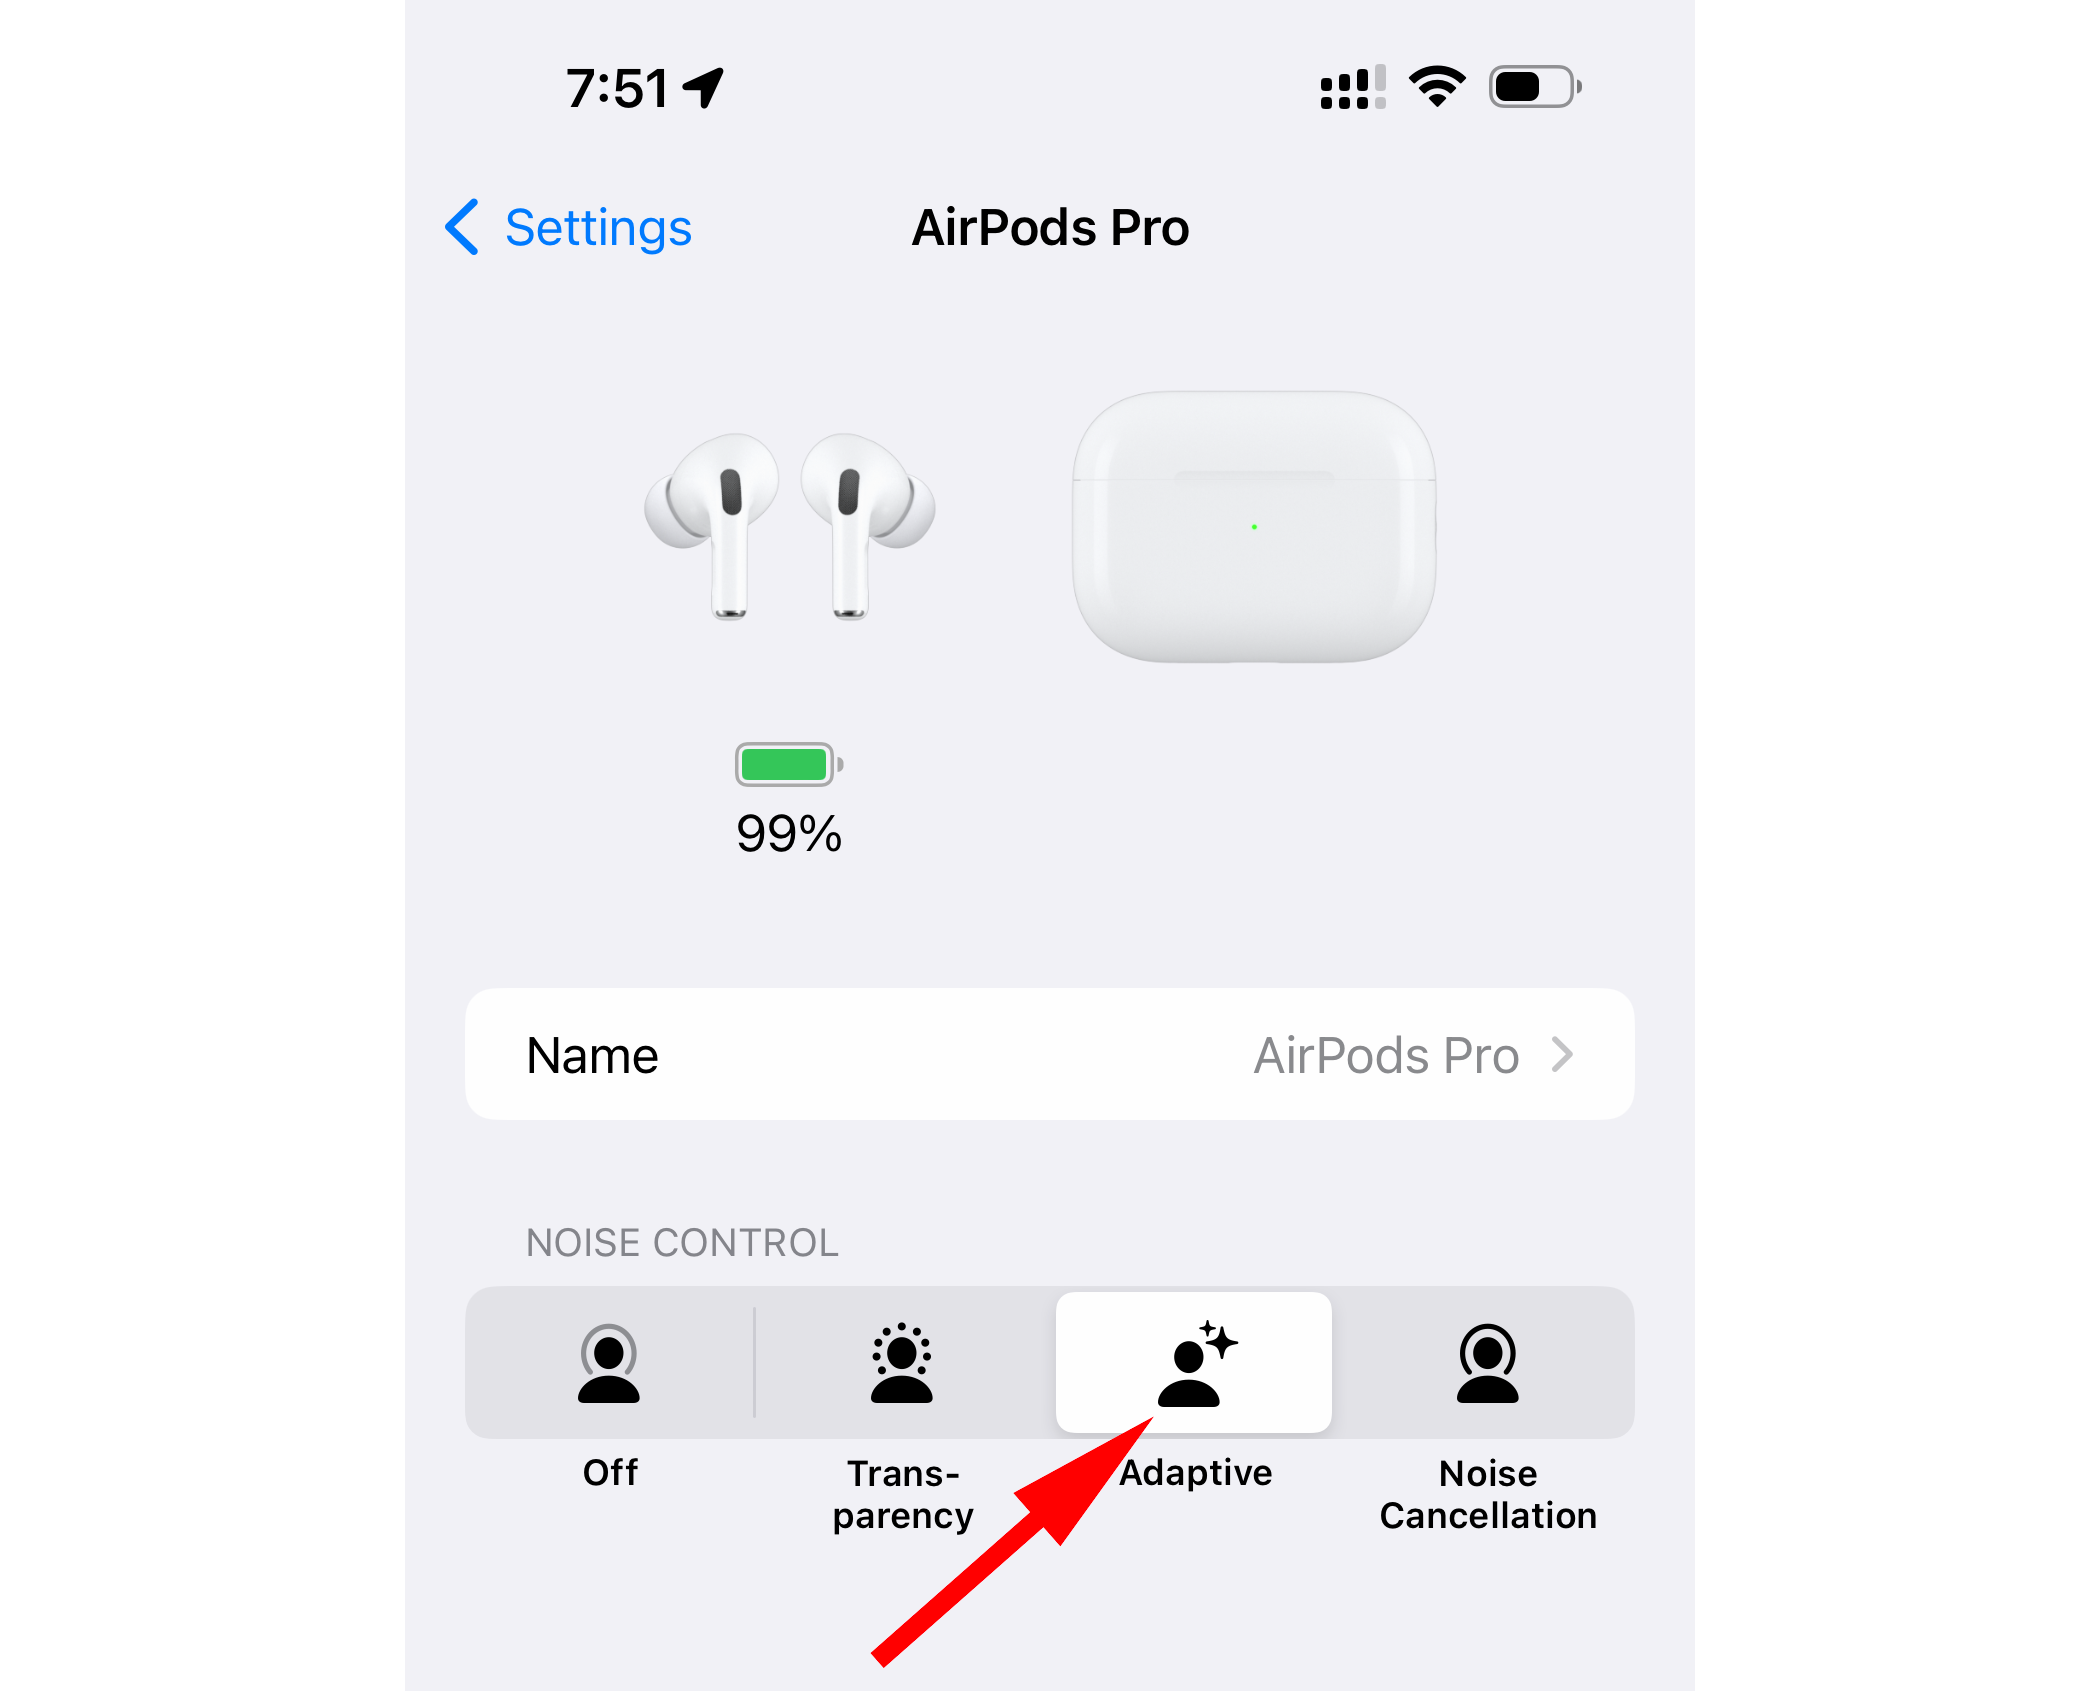 AirPods settings on iPhone with the Adaptive option annotated in the Noise Control section.